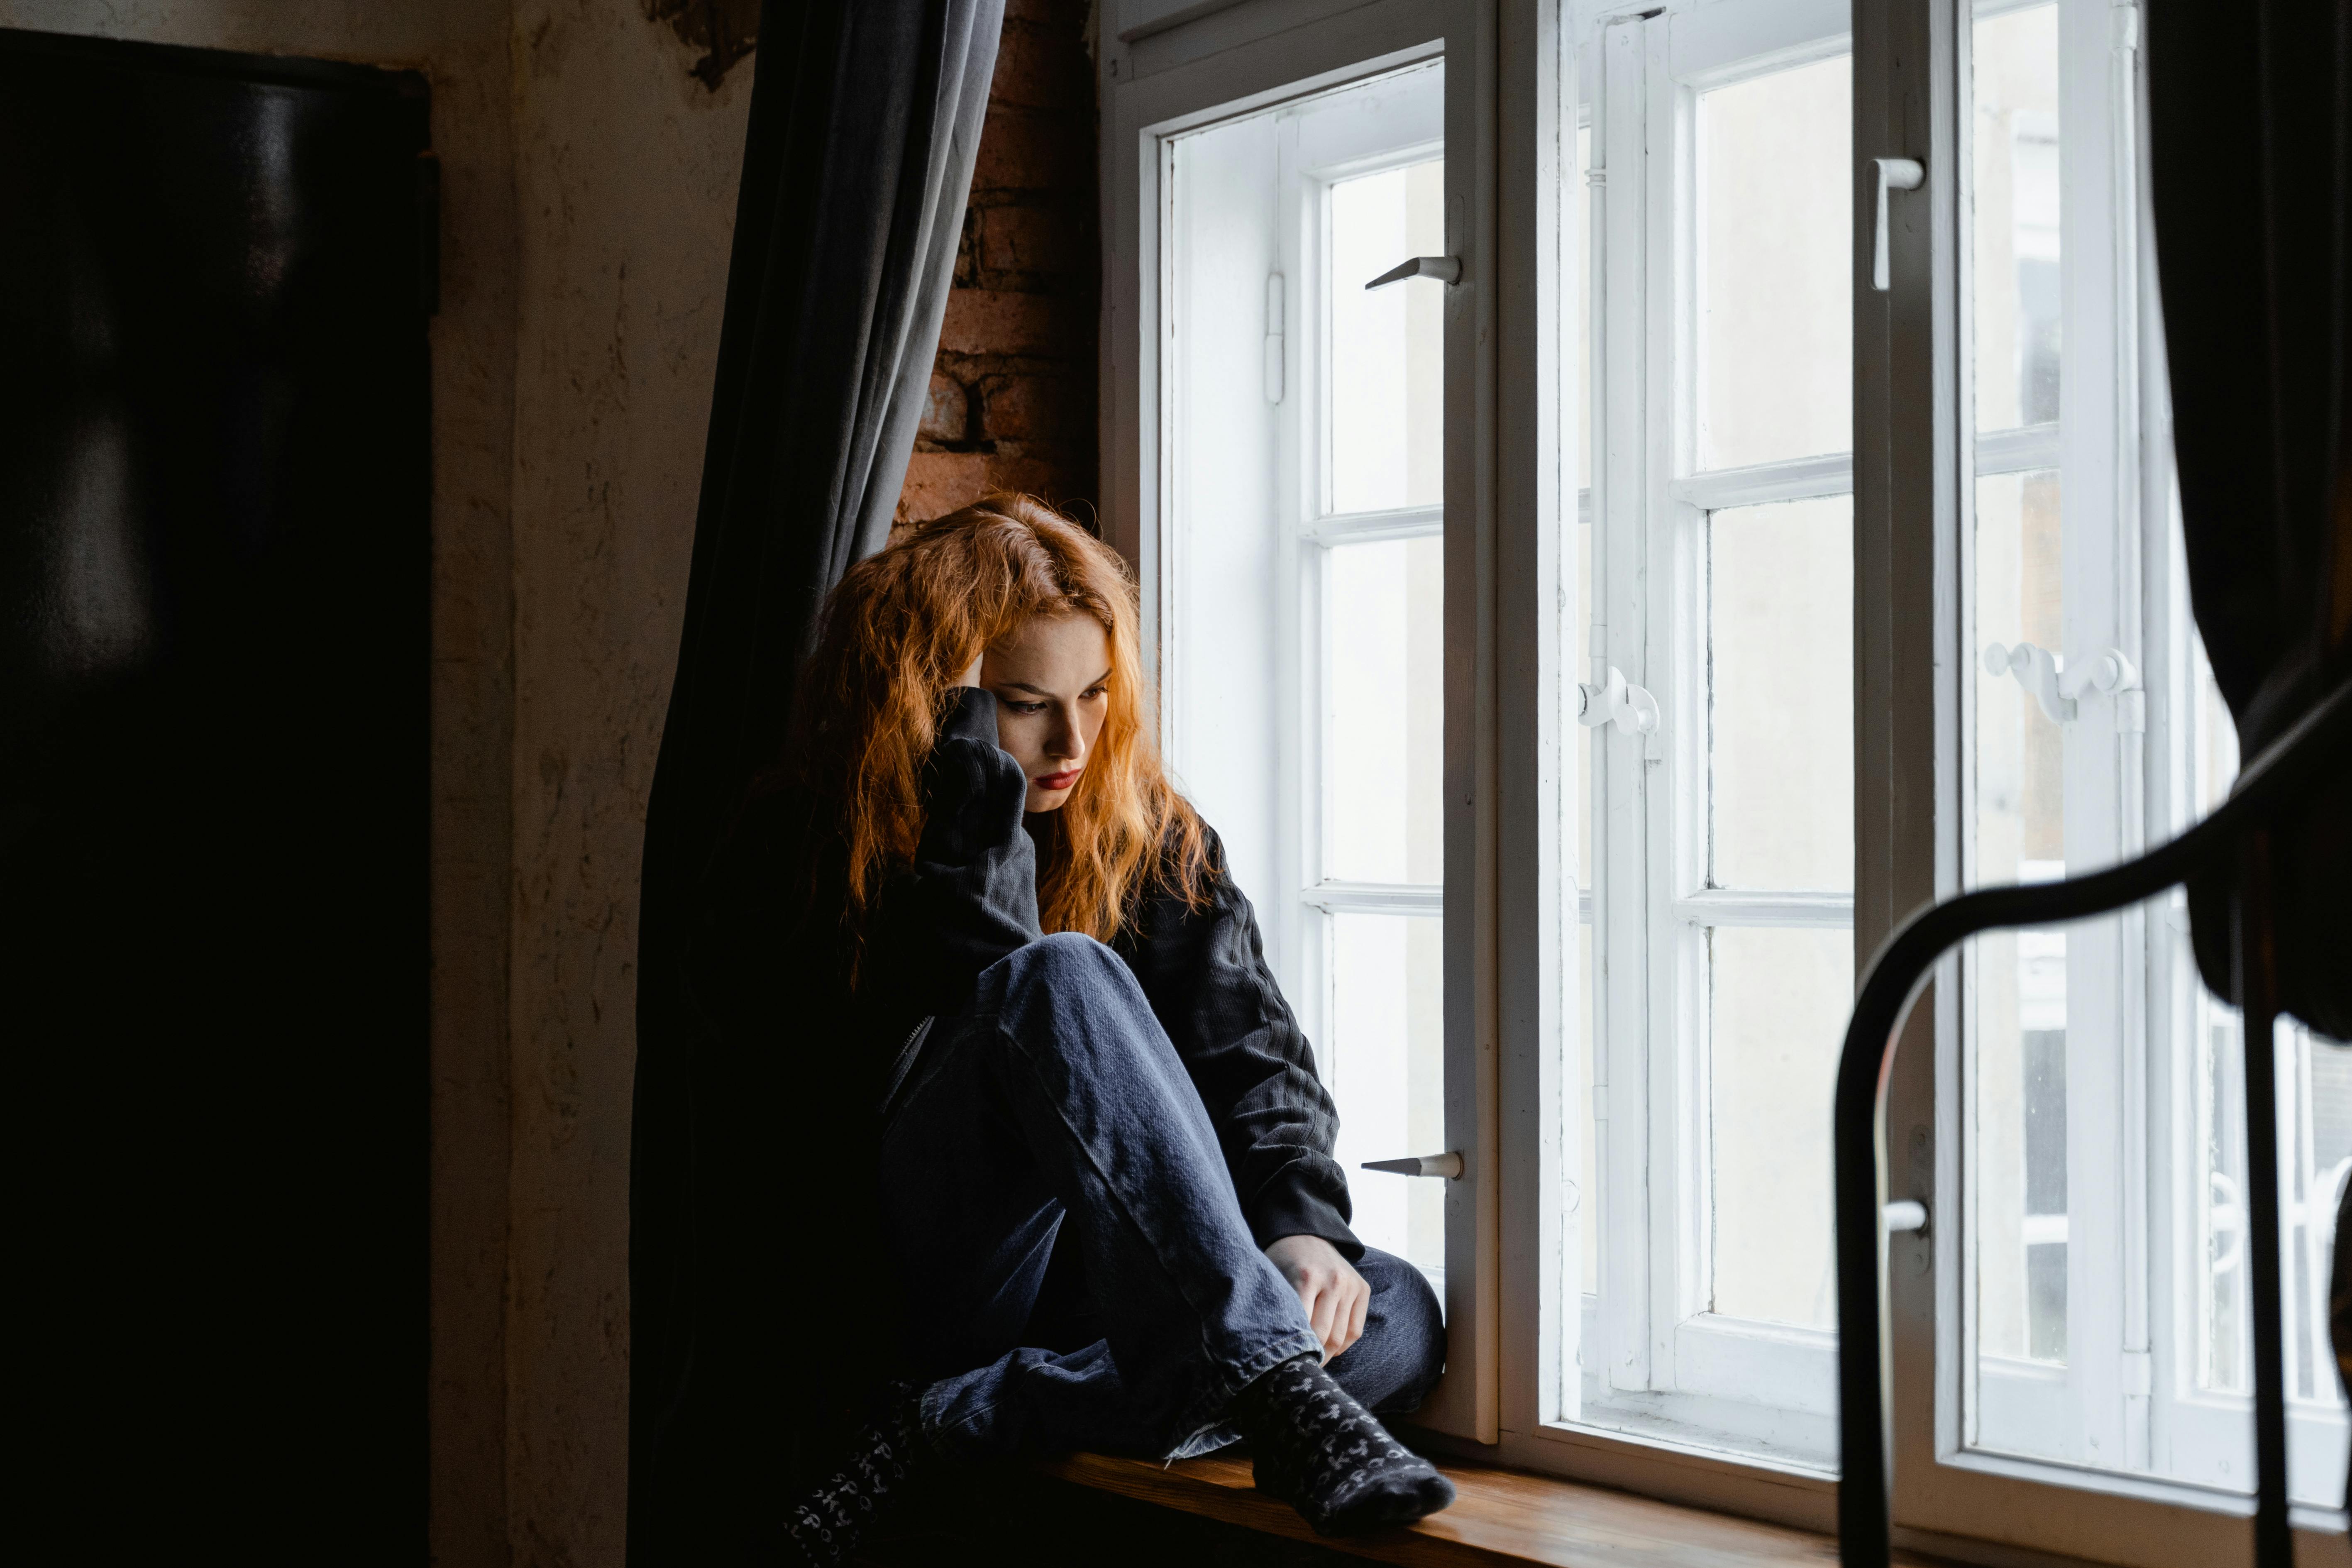 A woman looking upset while sitting by a window | Source: Pexels